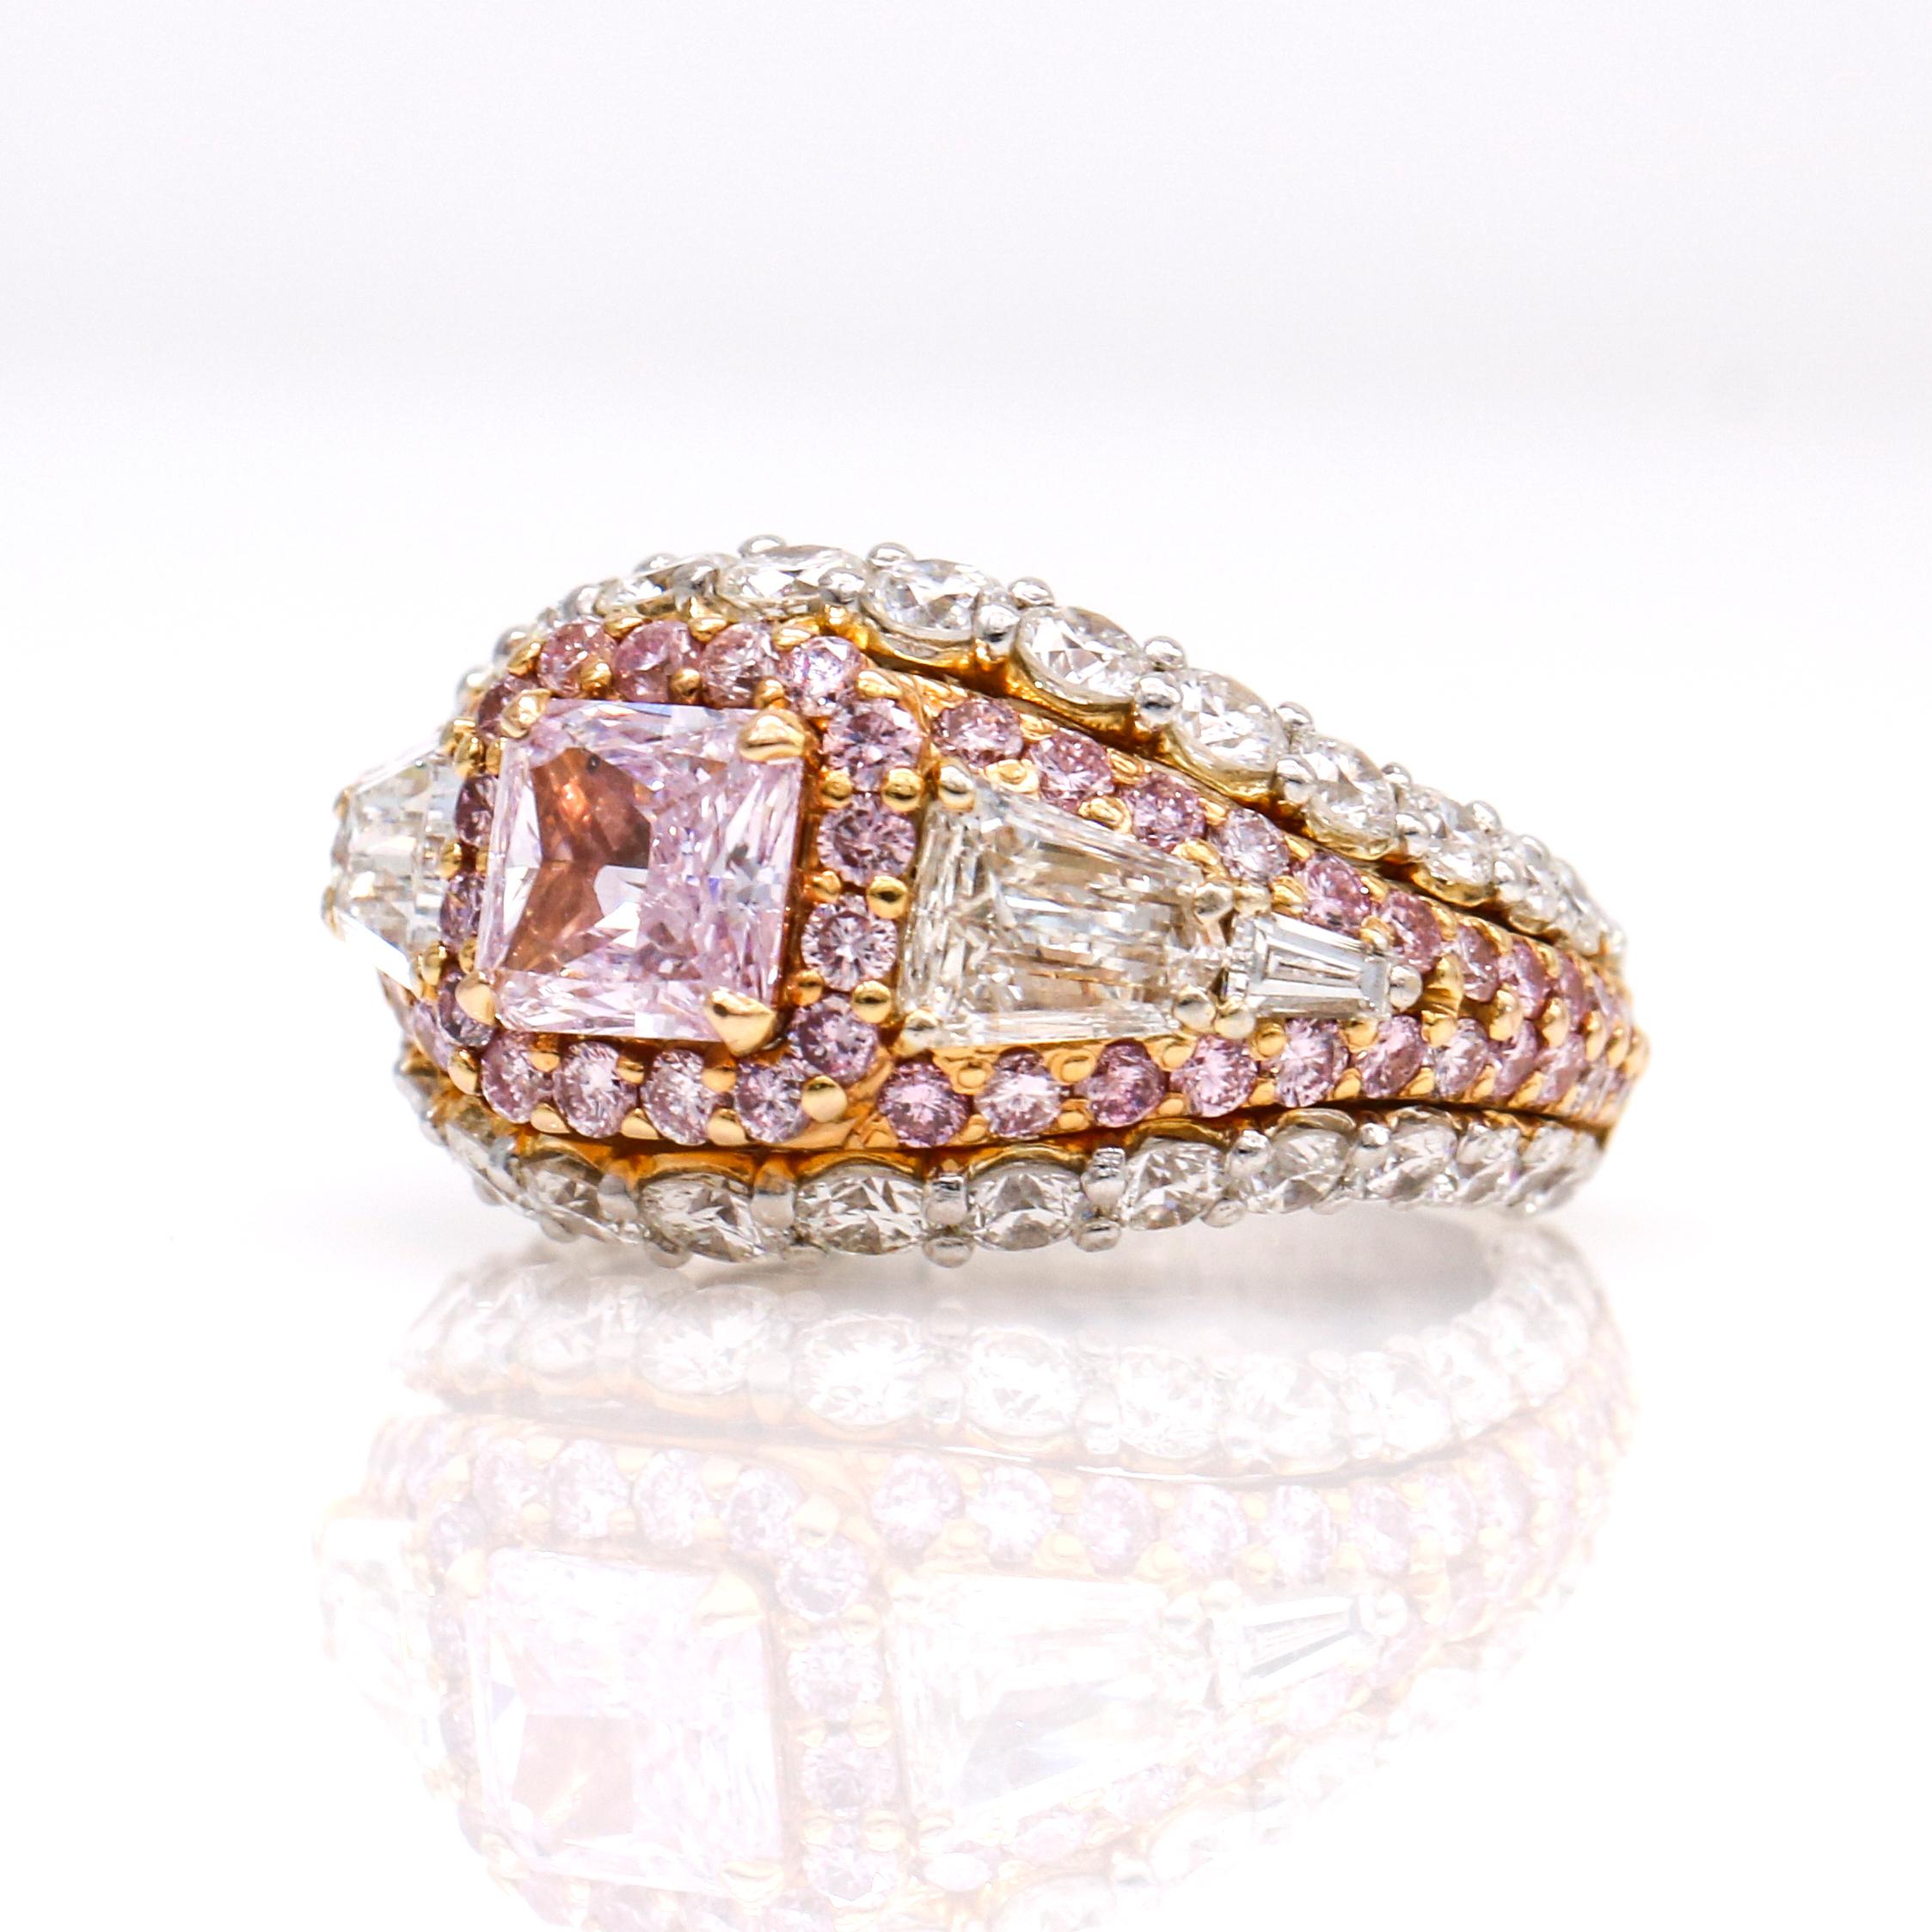 GIA Certified Fancy Pink Diamond Engagement Ring in Platinum and 18k Gold In Excellent Condition For Sale In Boca Raton, FL